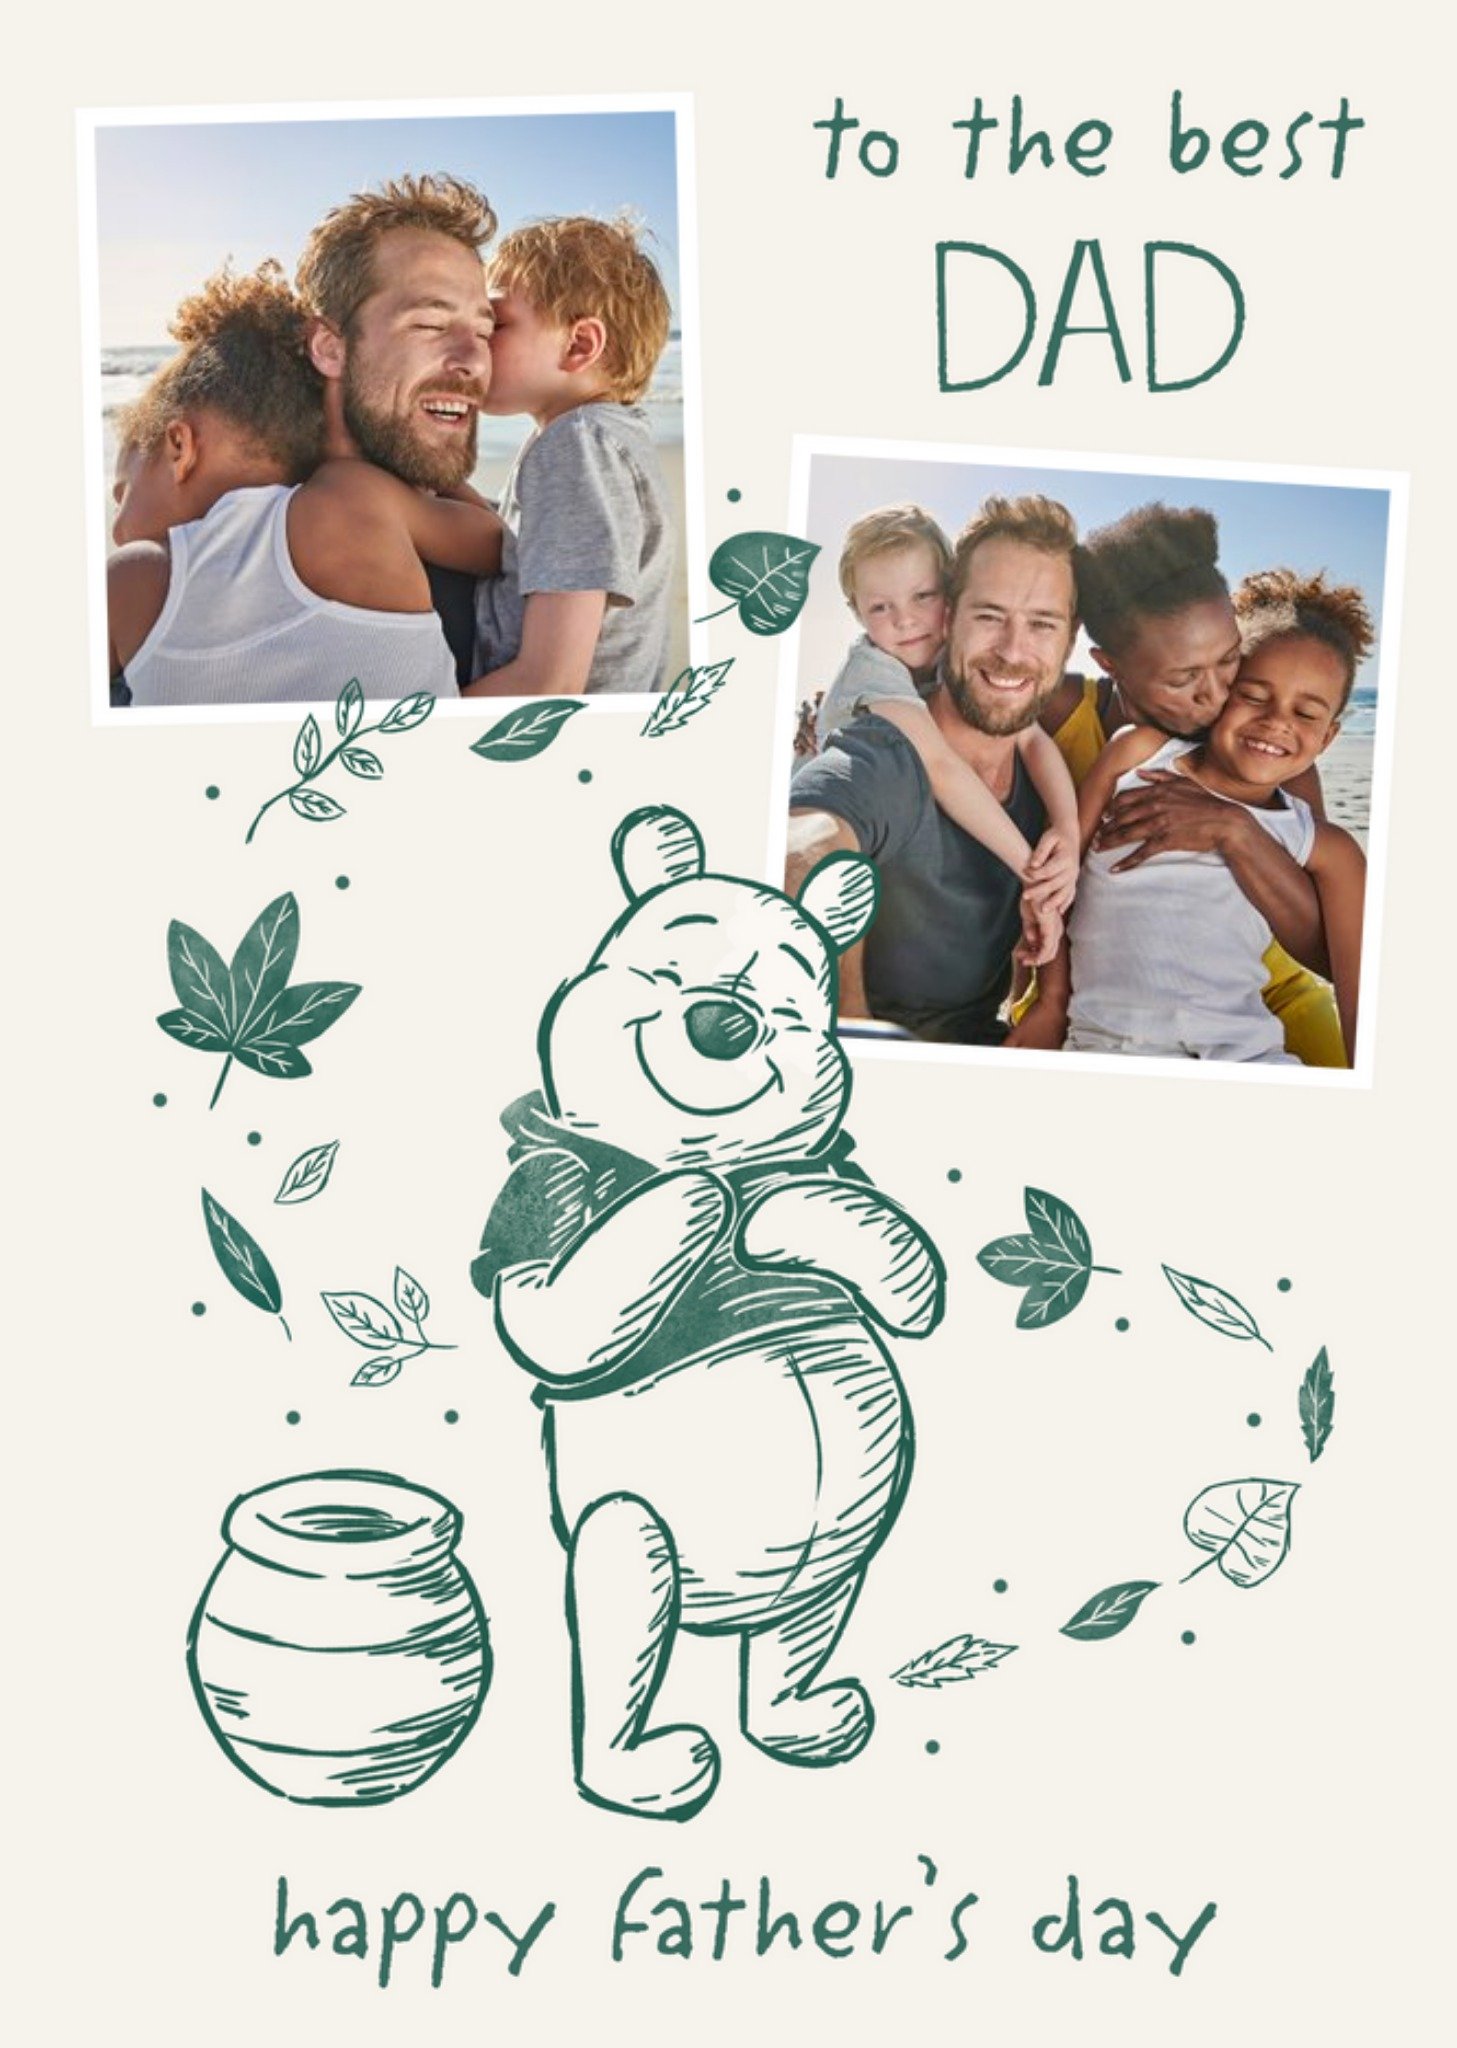 Disney Winnie The Pooh To The Best Dad Father's Day Card Ecard